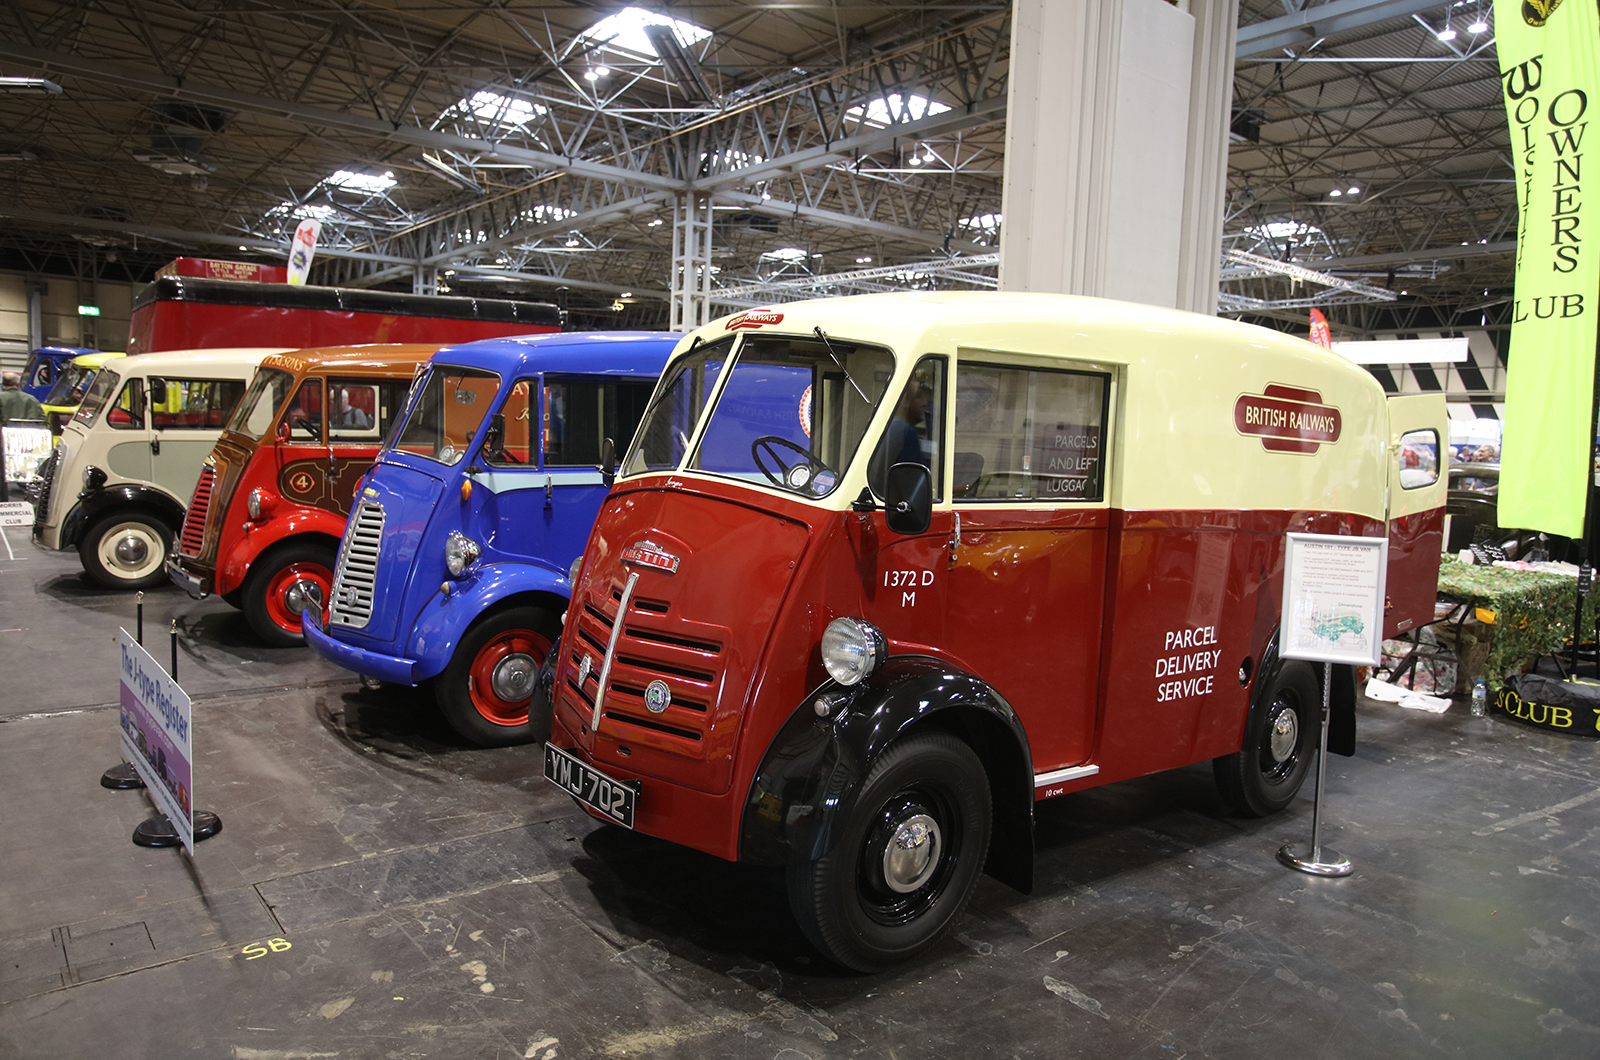 Poignant WW1 tributes lift Classic Motor Show to new heights